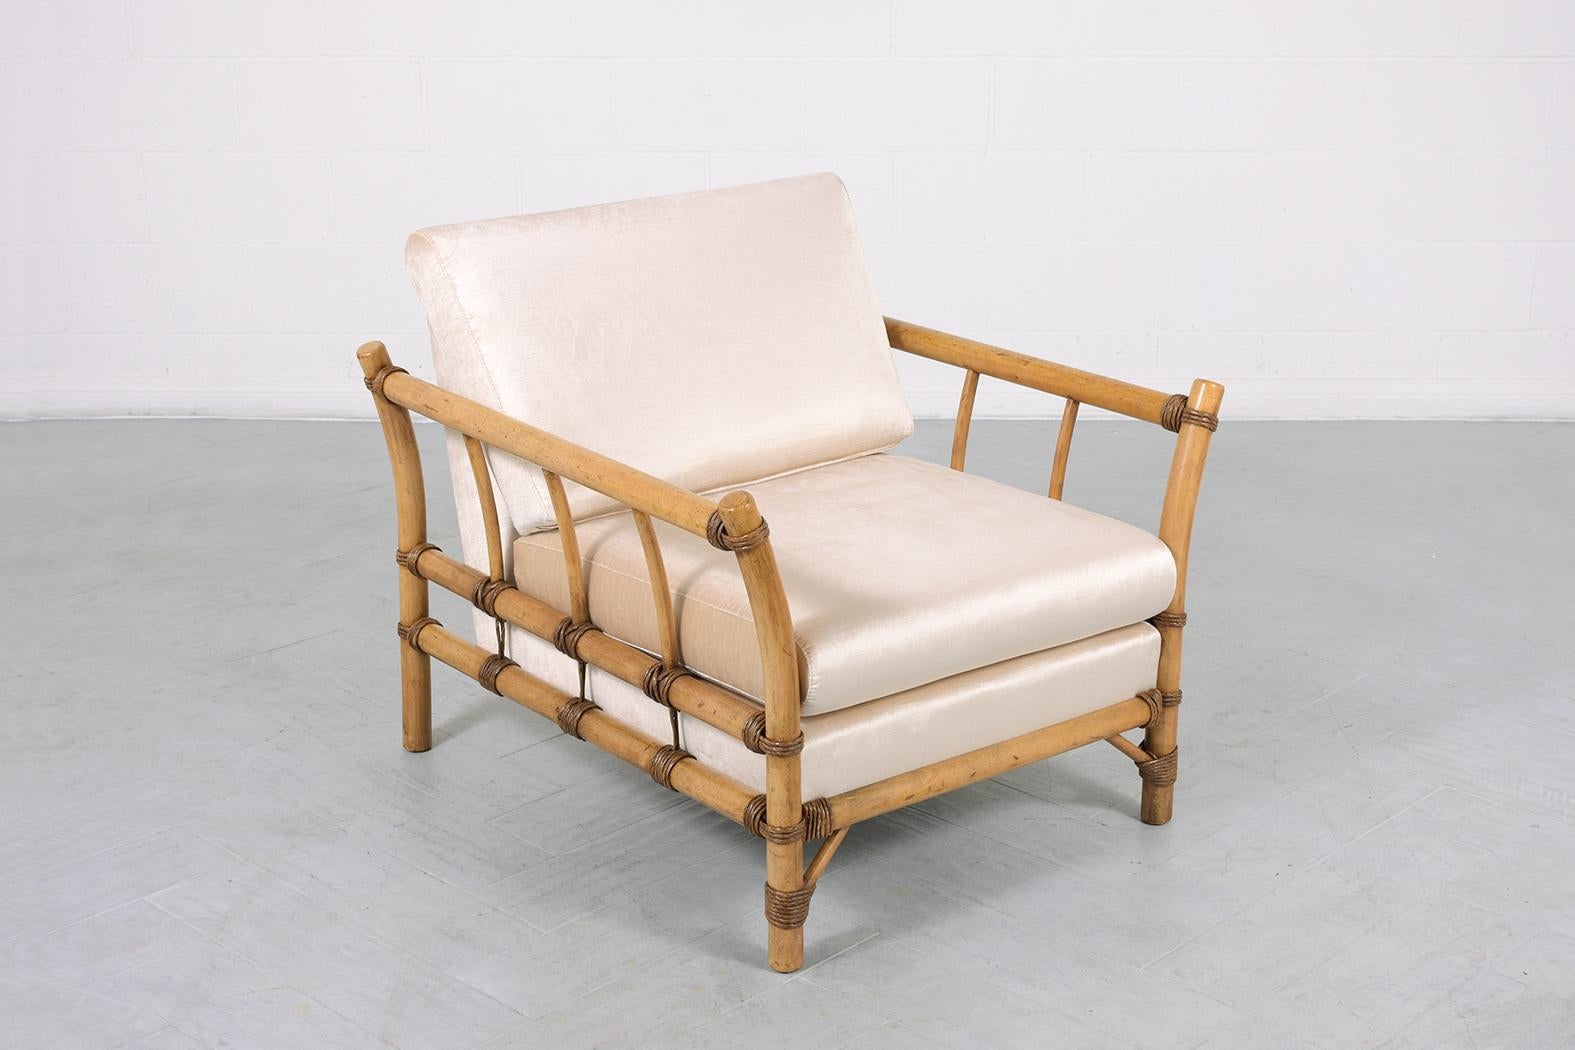 Restored Vintage Bamboo Style Chaise Lounge with Rattan Accents & Velvet Cushion In Good Condition For Sale In Los Angeles, CA